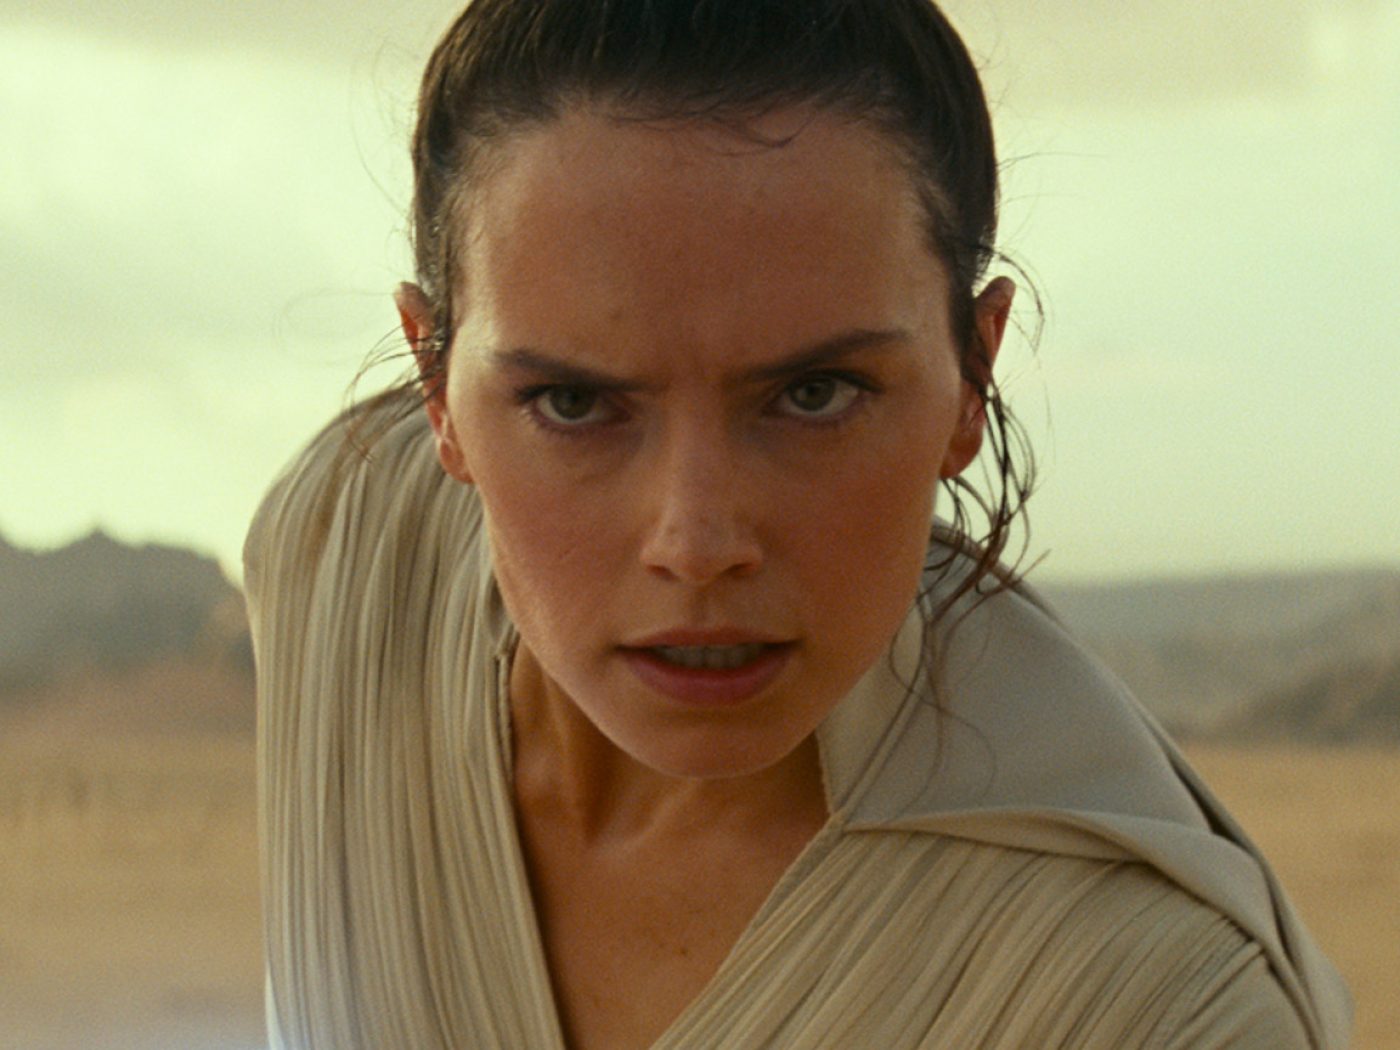 Star Wars 9 Cameos Revealed, Who Shows Up in The Rise of Skywalker